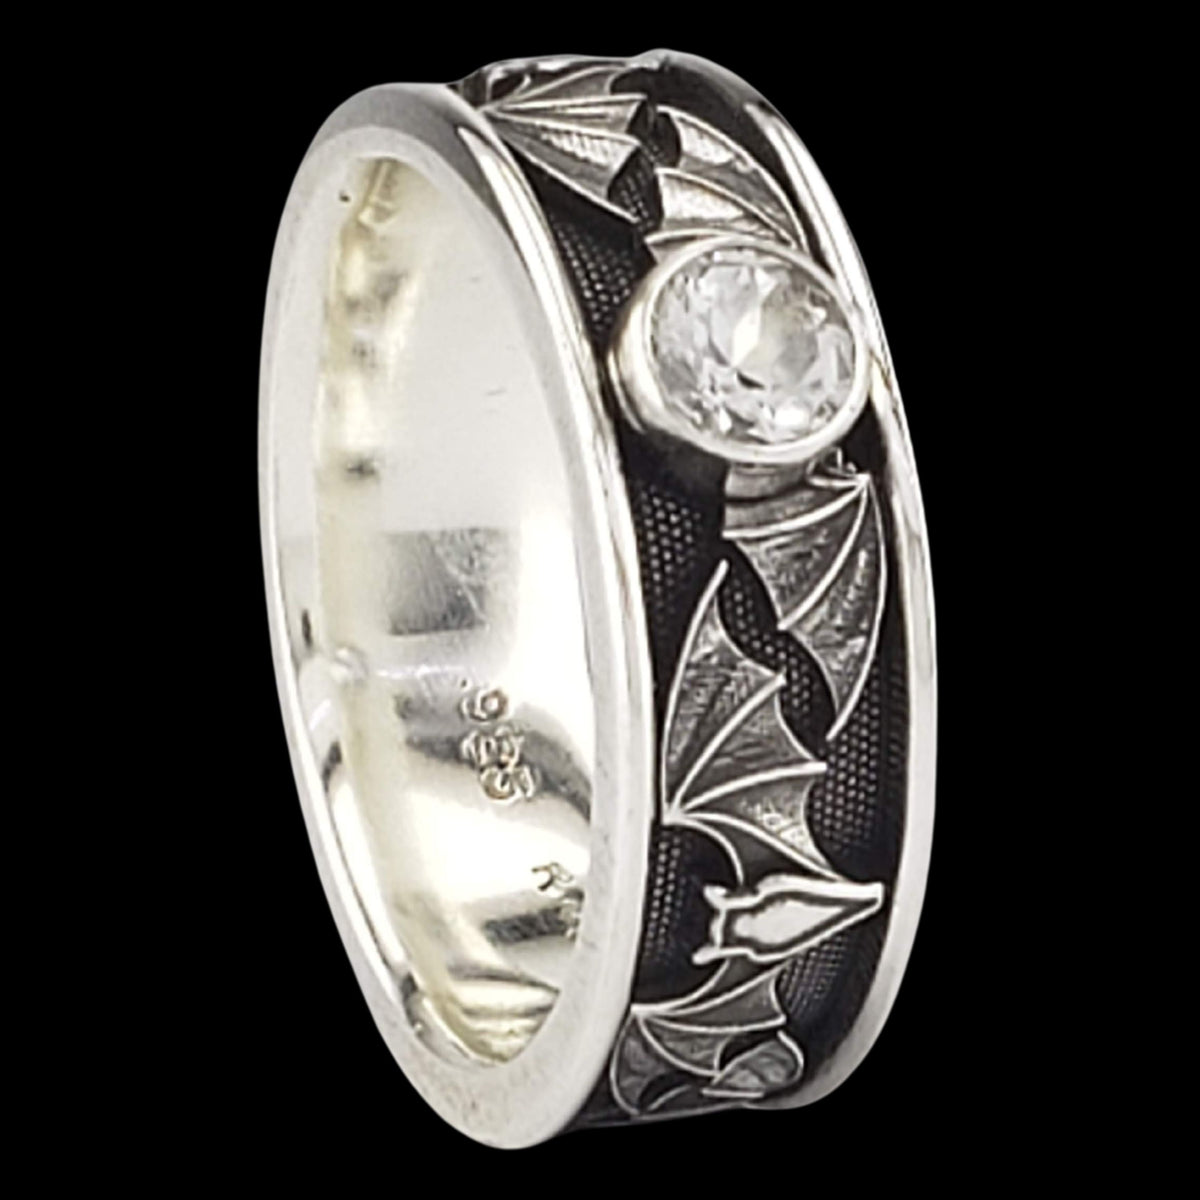 BAT WIDE SOLITAIRE Band Ring in GOLD with CHOICE OF 5mm GEMSTONES - Staring at $1049